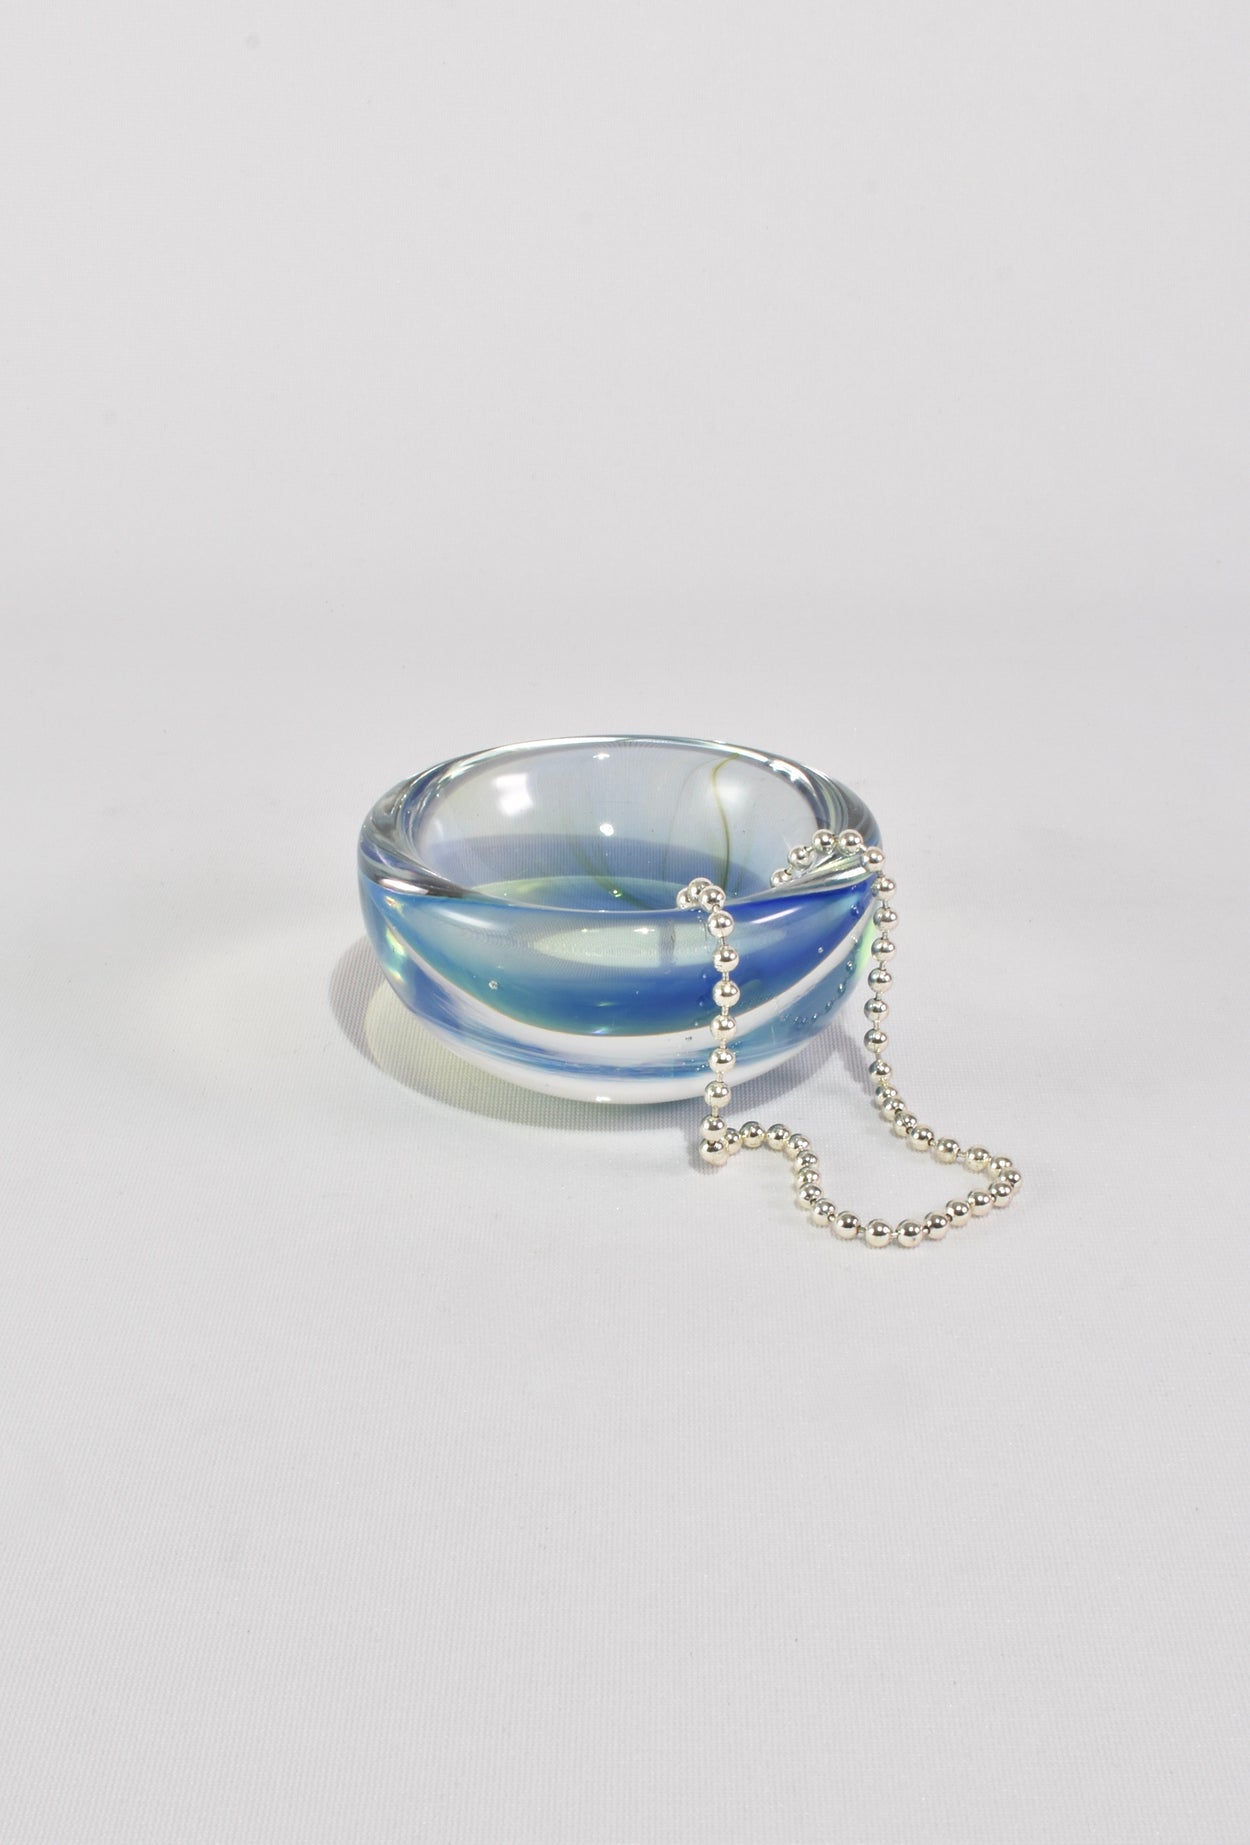 Opalescent Glass Bowl